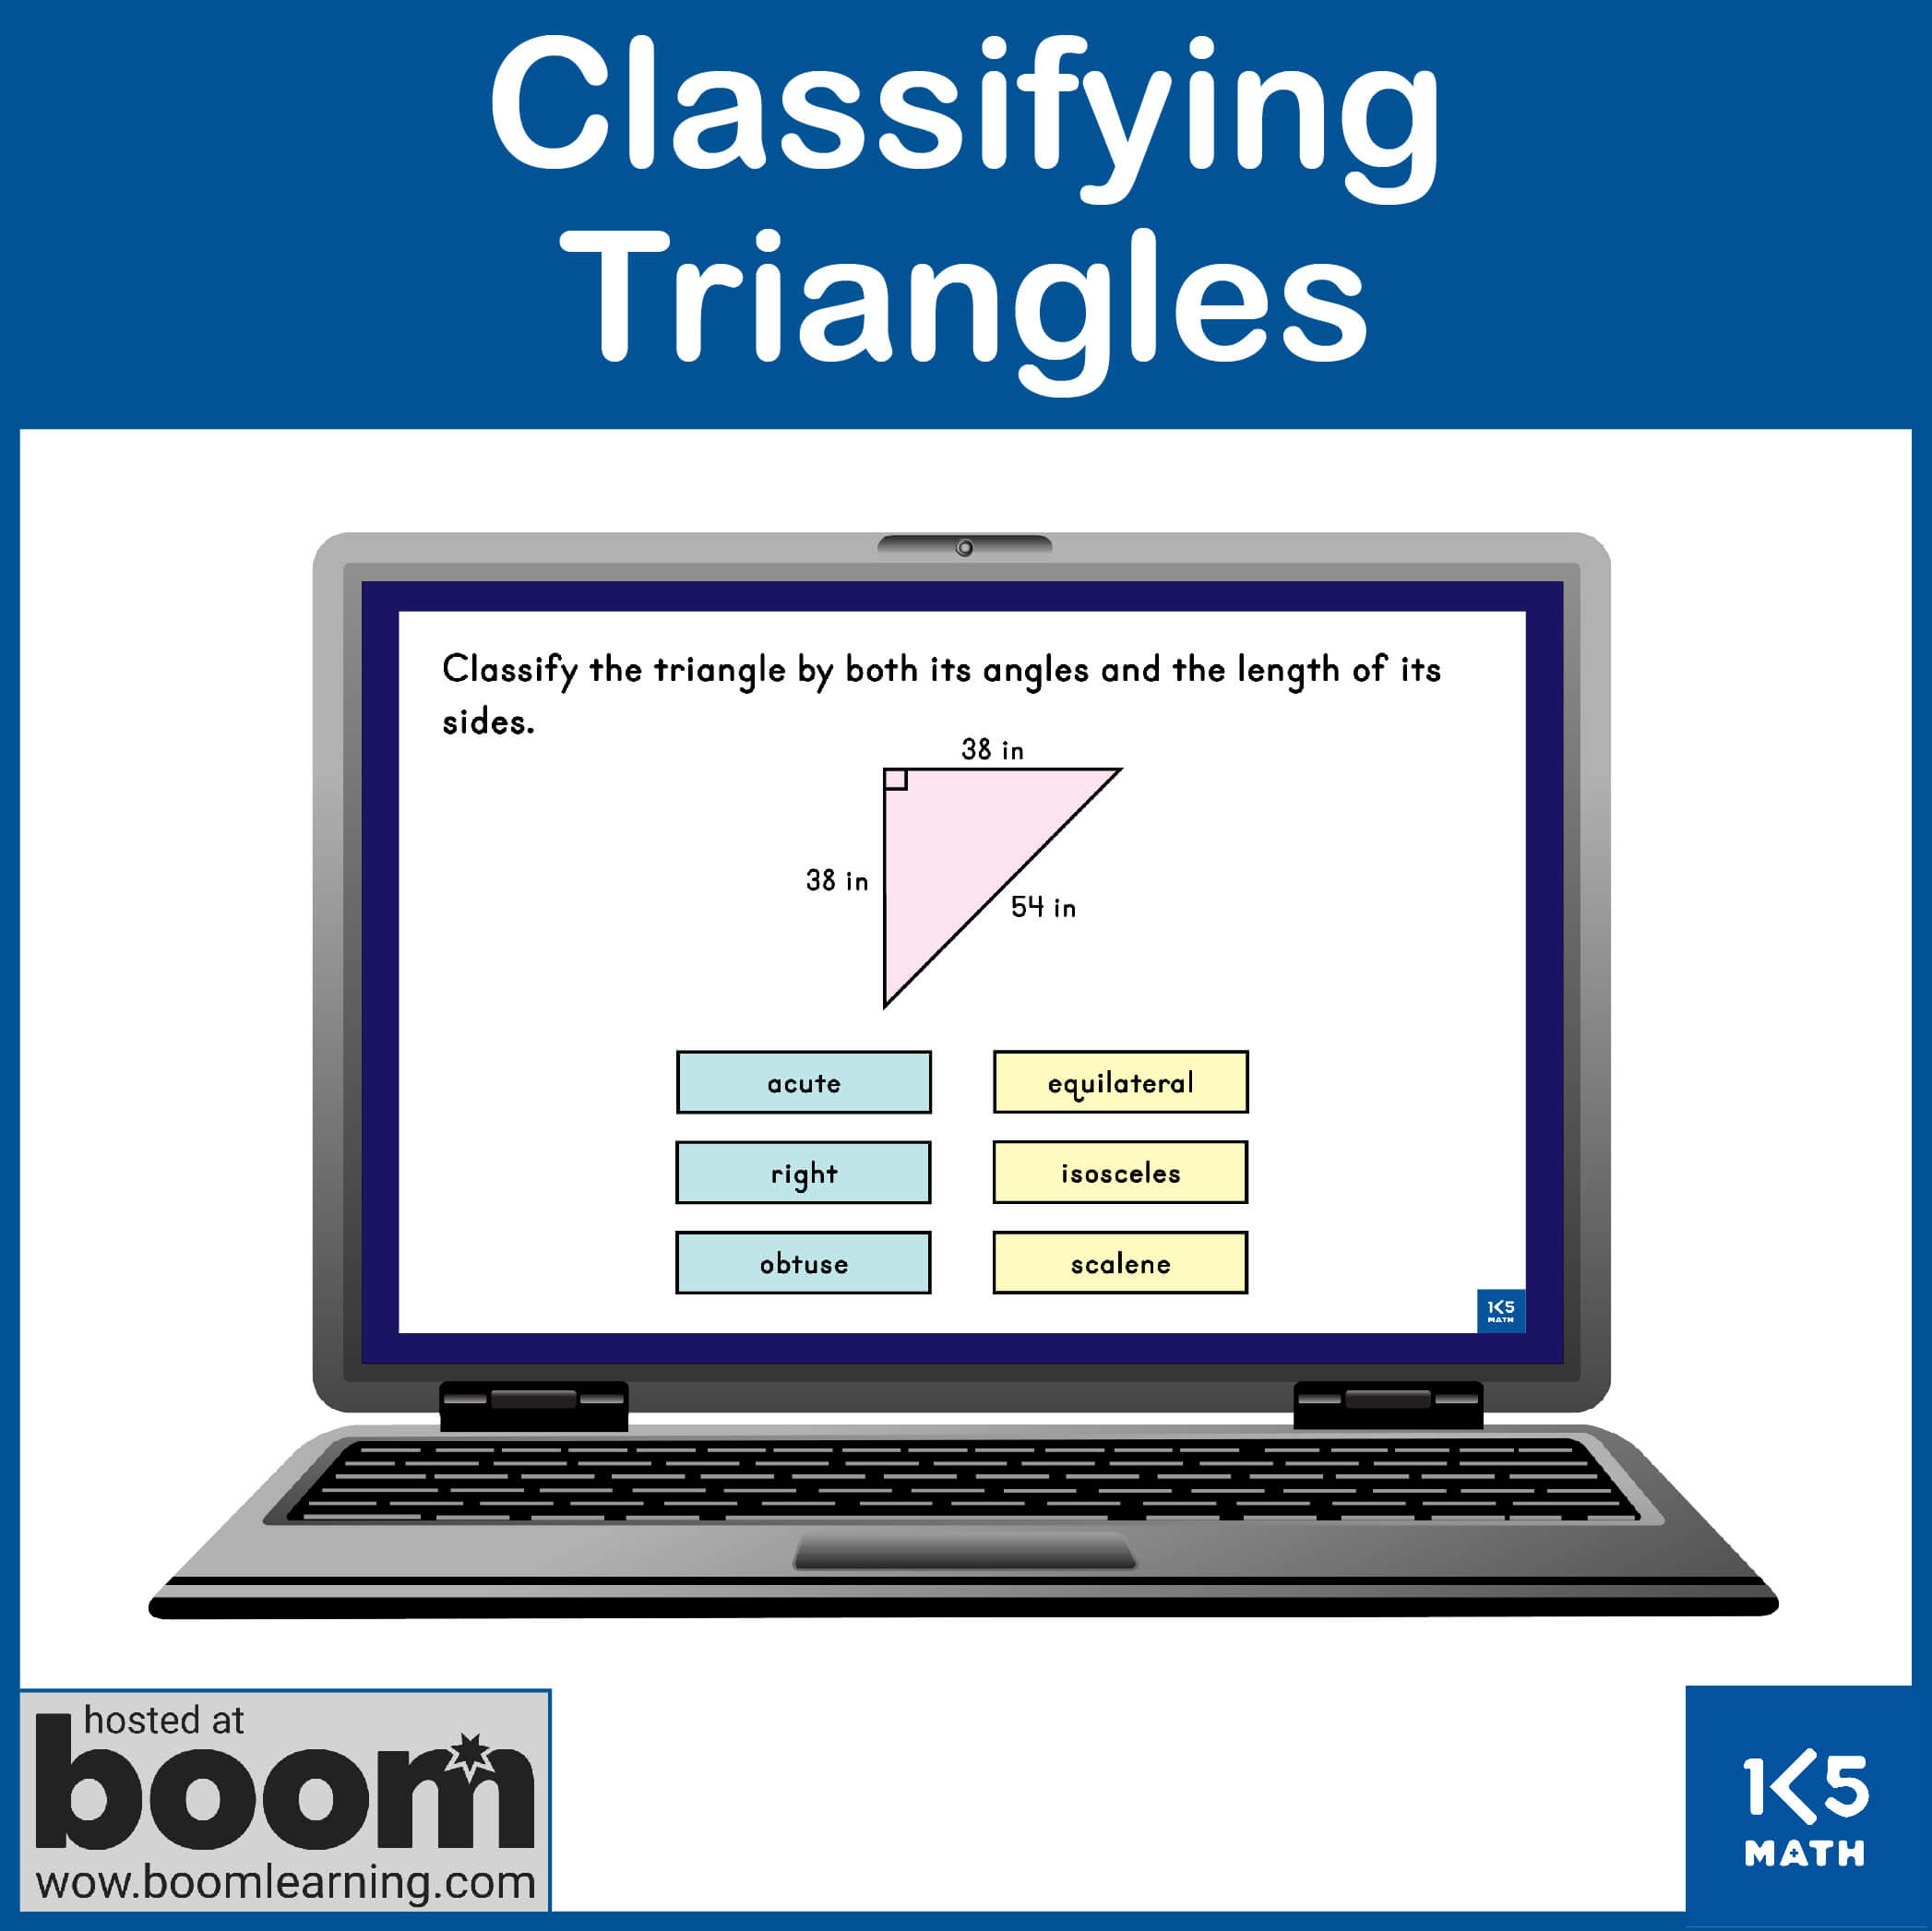 Boom Cards: Classifying Triangles